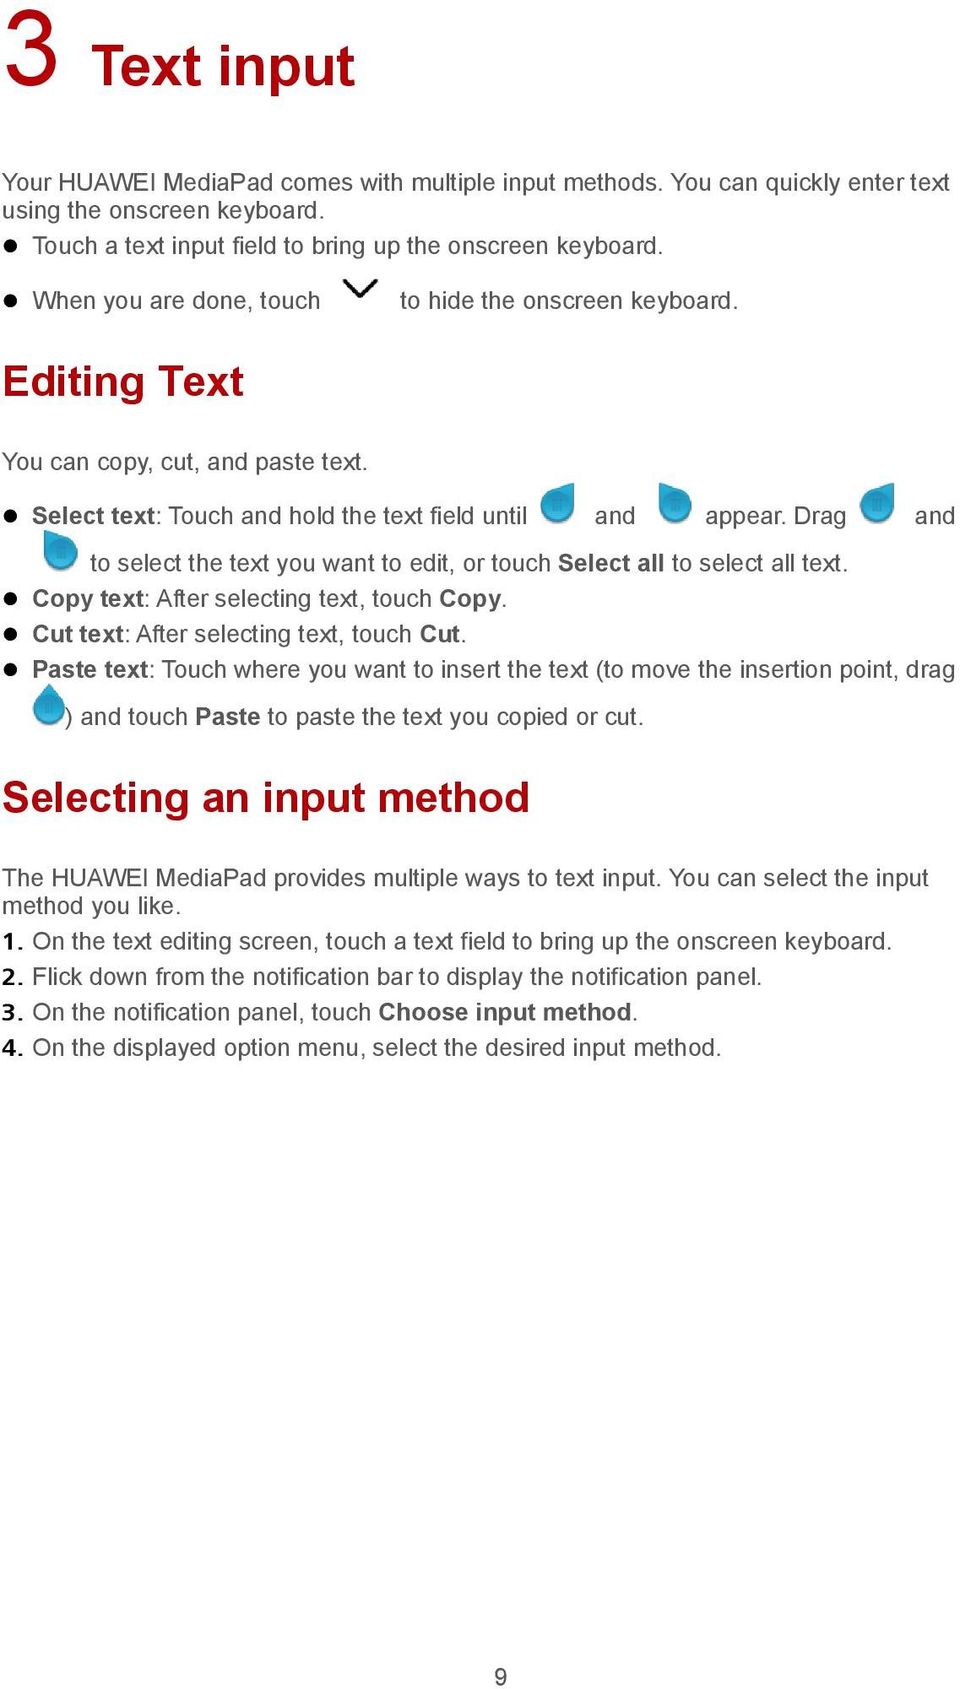 Drag and to select the text you want to edit, or touch Select all to select all text. Copy text: After selecting text, touch Copy. Cut text: After selecting text, touch Cut.